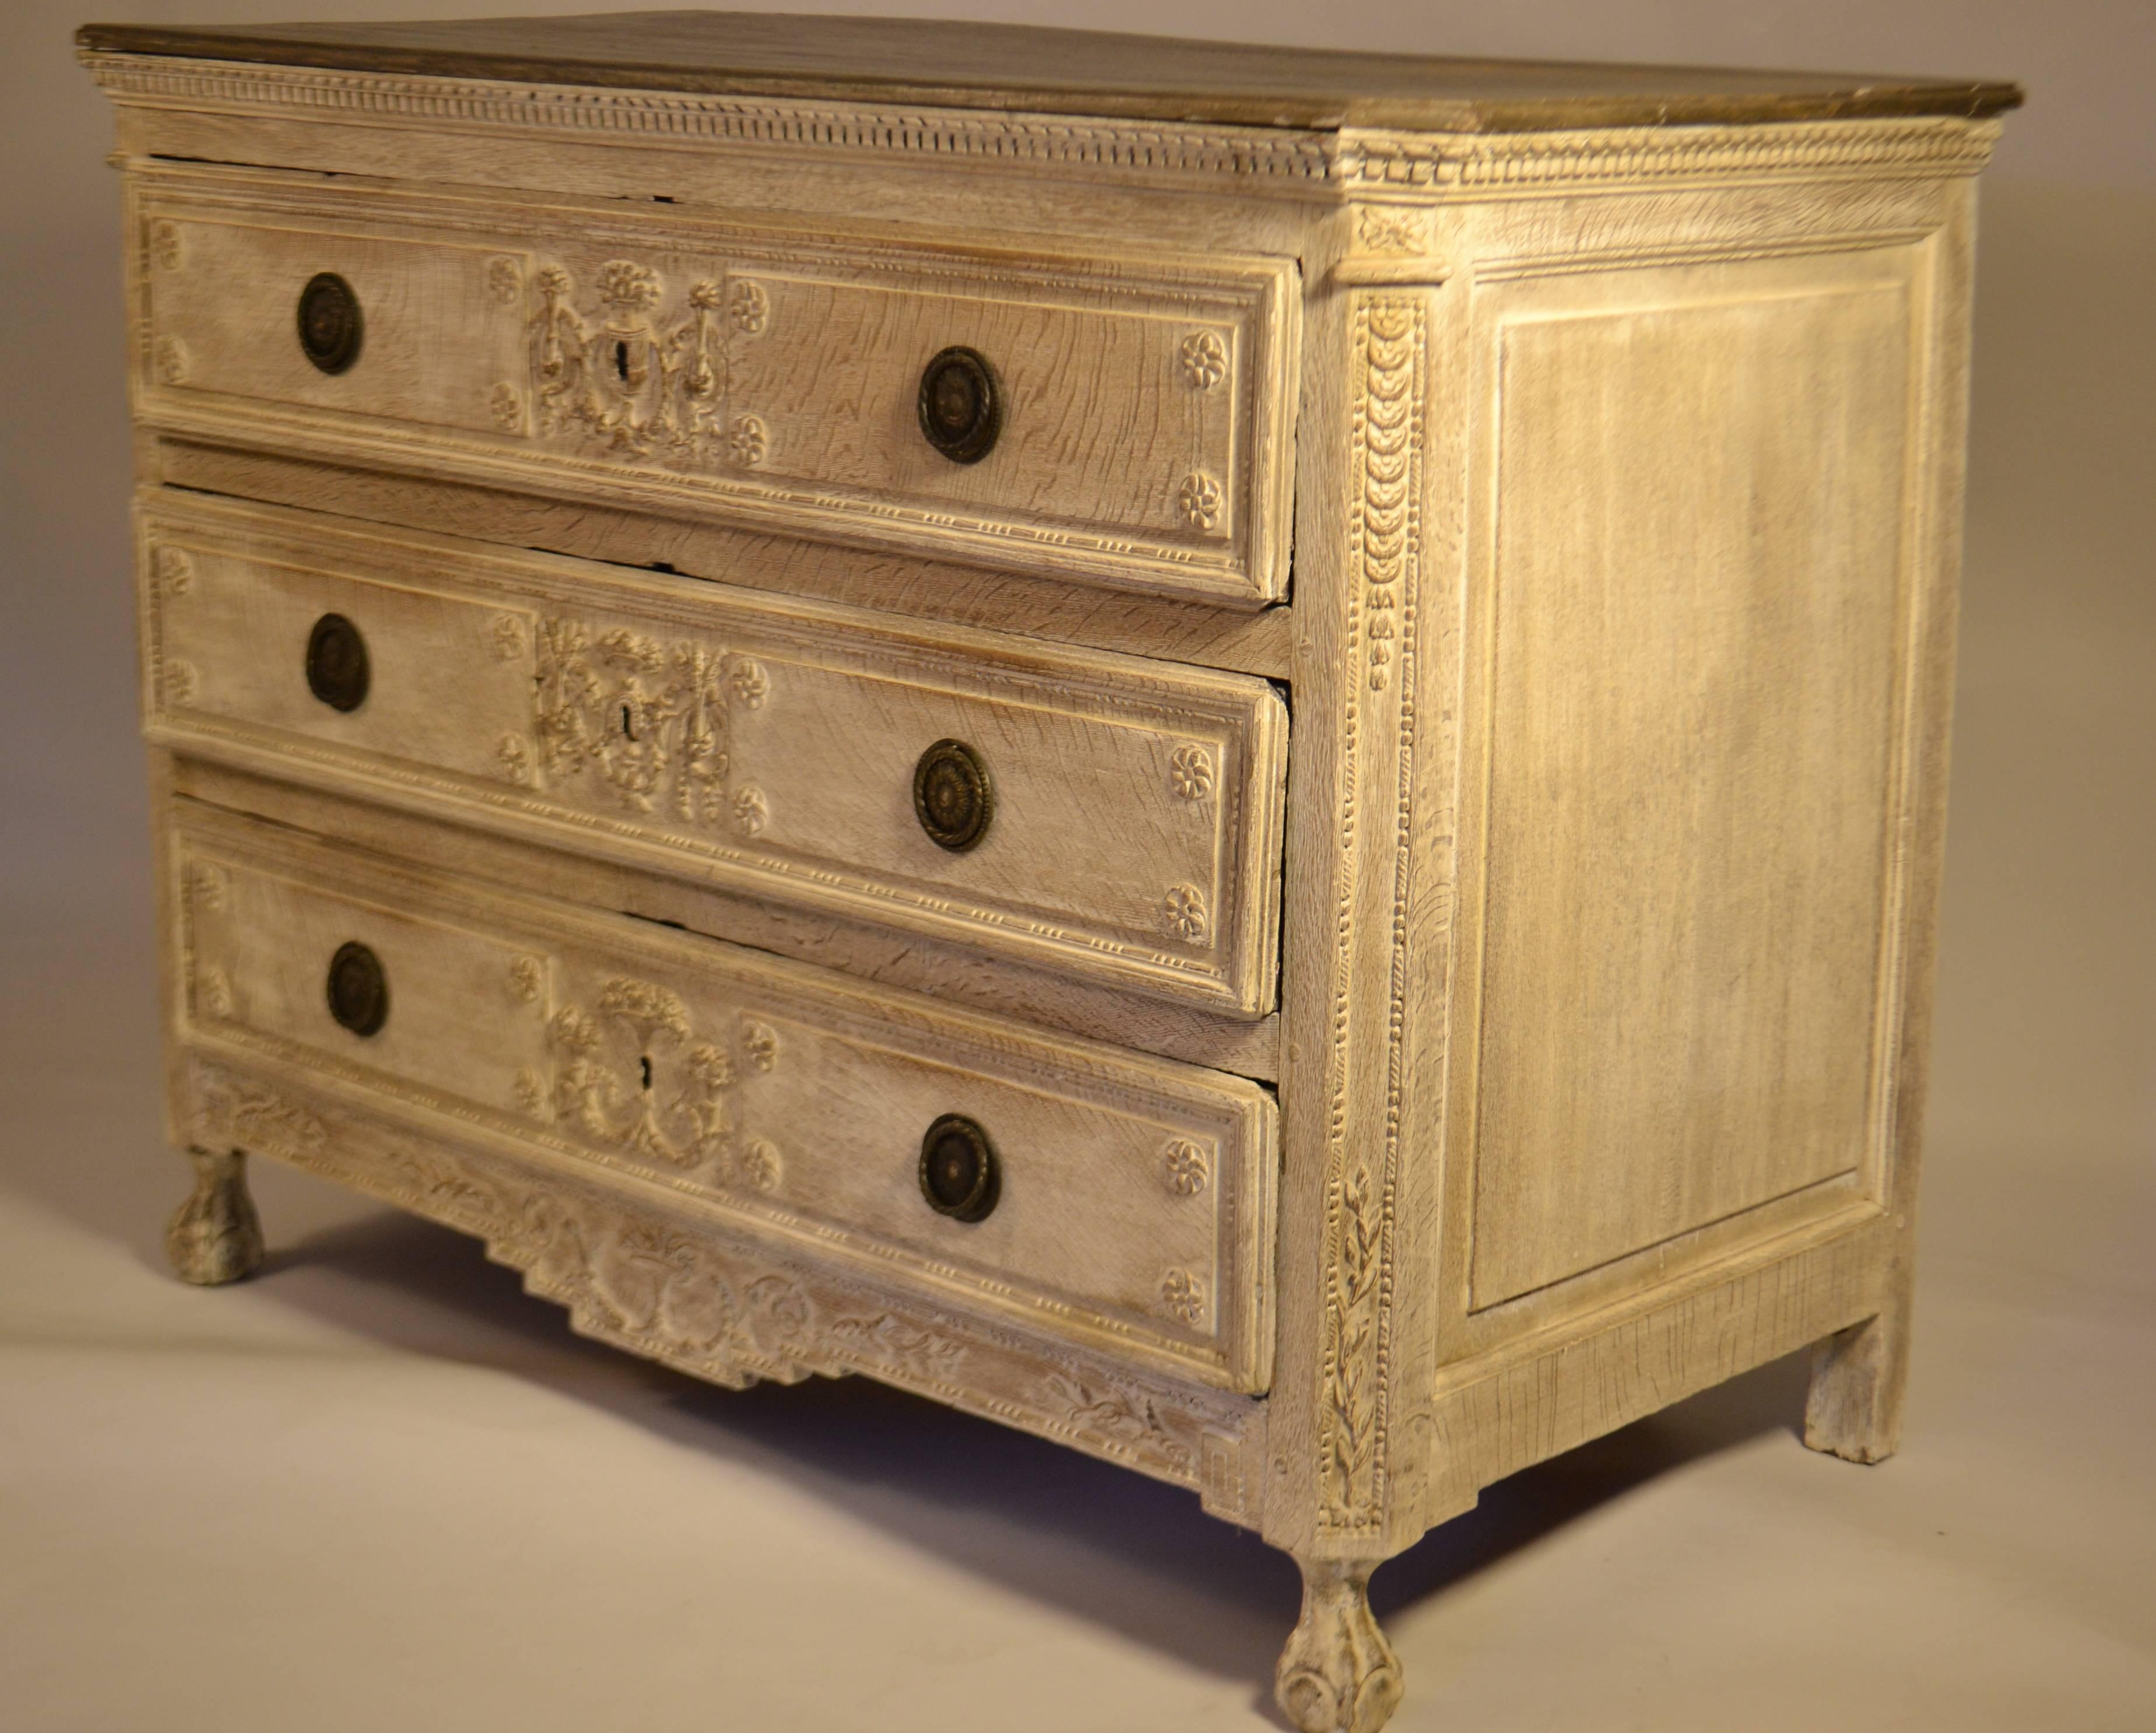 Louis XVI period Dutch commode with central urn and floral carved motif on the drawers flanked by circular rosette hardware with a barley twist round handle. Each drawer has rosettes in each corner and is bordered by carved beading. The apron is